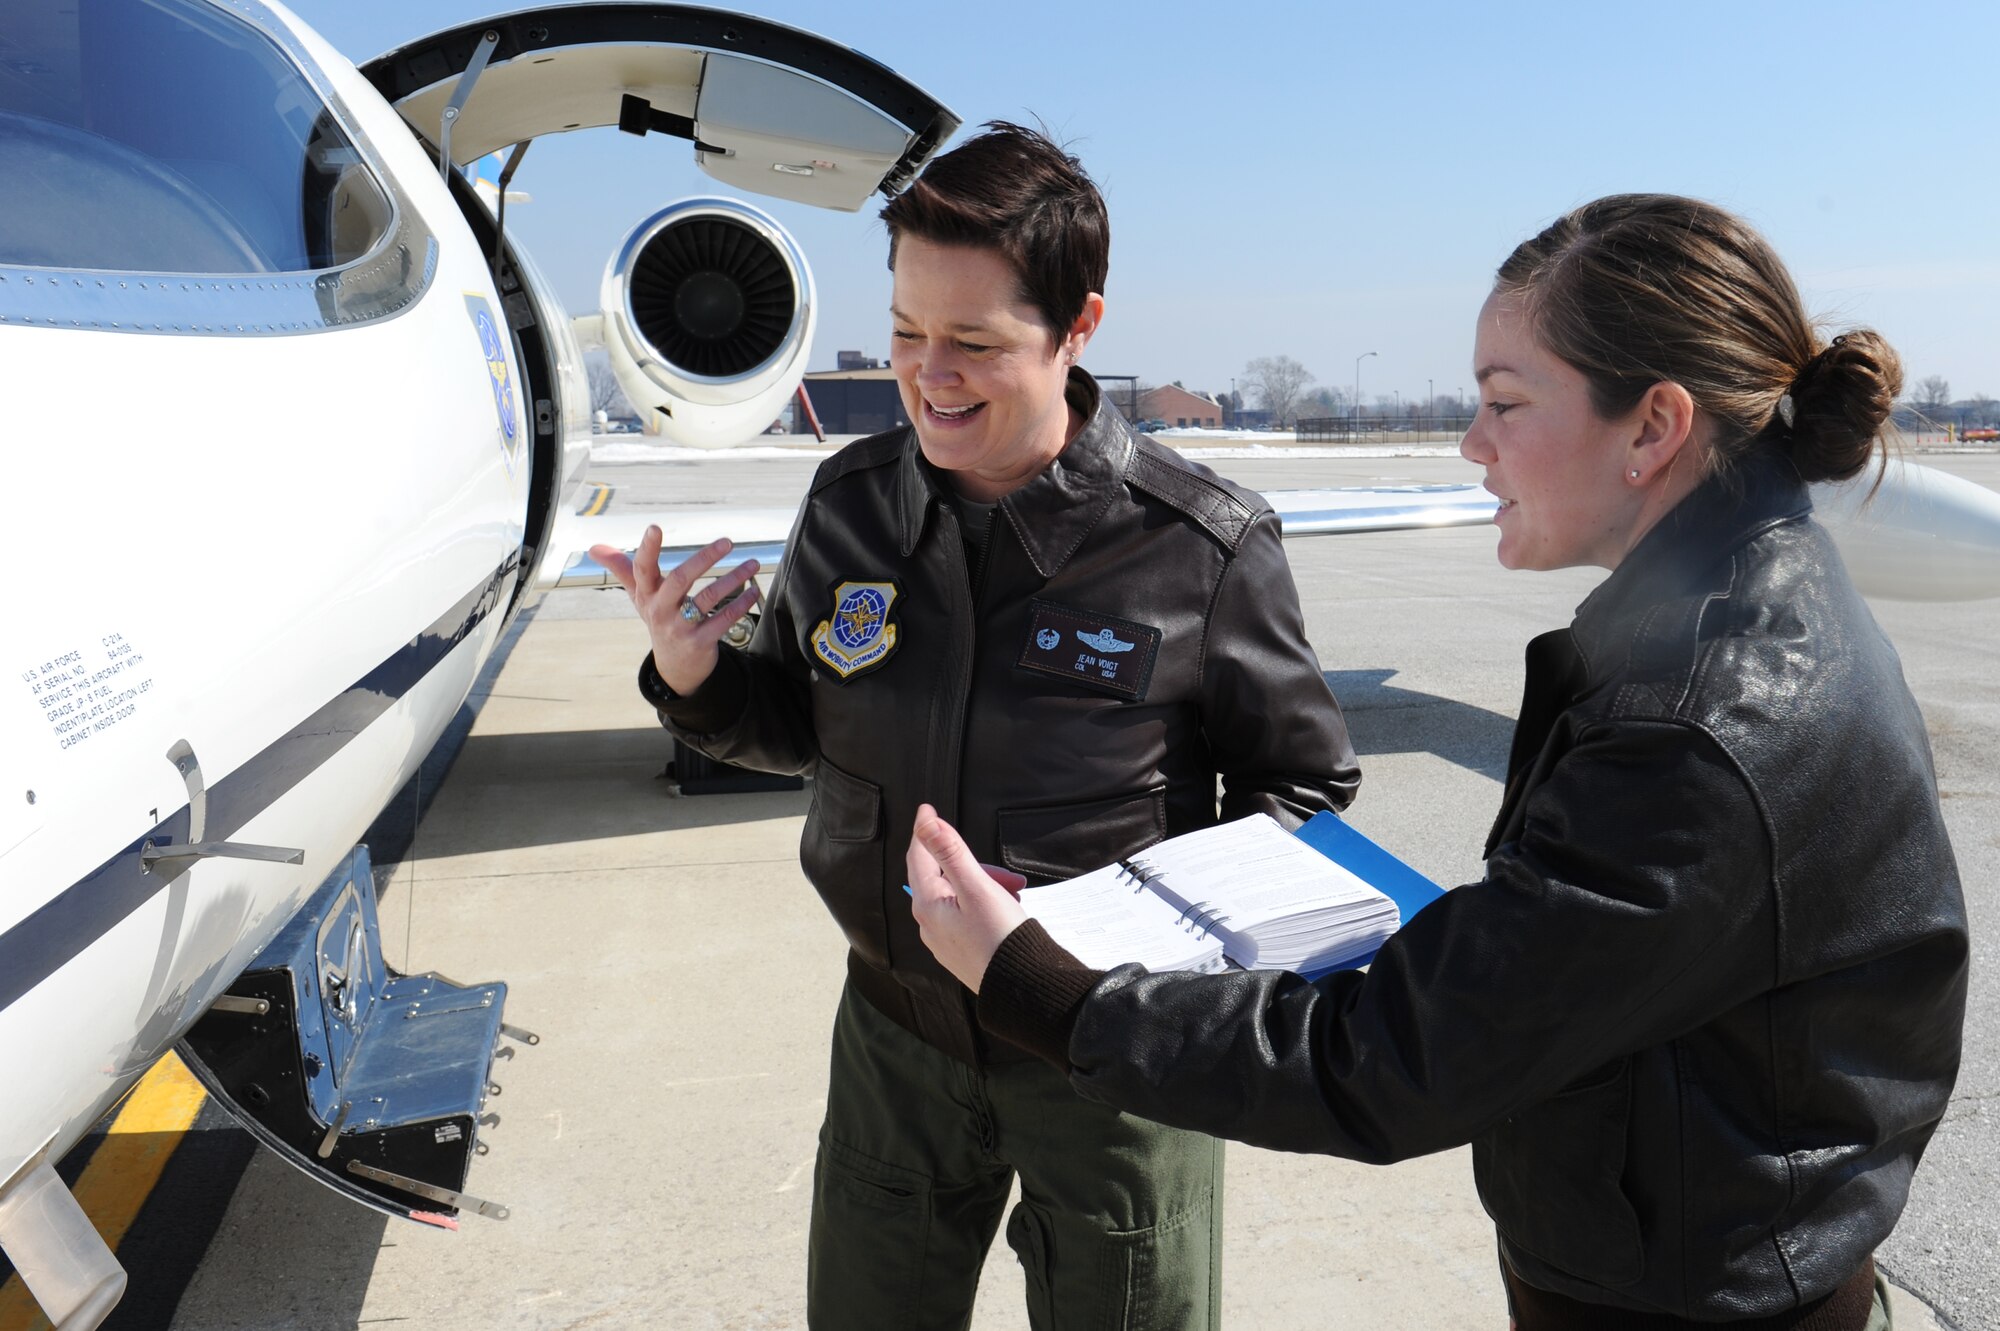 Col. Jeanette Voigt examines the outside of a C-21 March 6 with Capt. Shannon Williams. Voigt and Williams, along with Lt. Col. Allison Trinklein, are the only female pilots at the 375th Operations Group.Williams is the 458th Airlift Squadron executive officer, and Trinklein is the 458th Airlift Squadron commander. (U.S. Air Force photo/Airman 1st Class Megan Friedl)